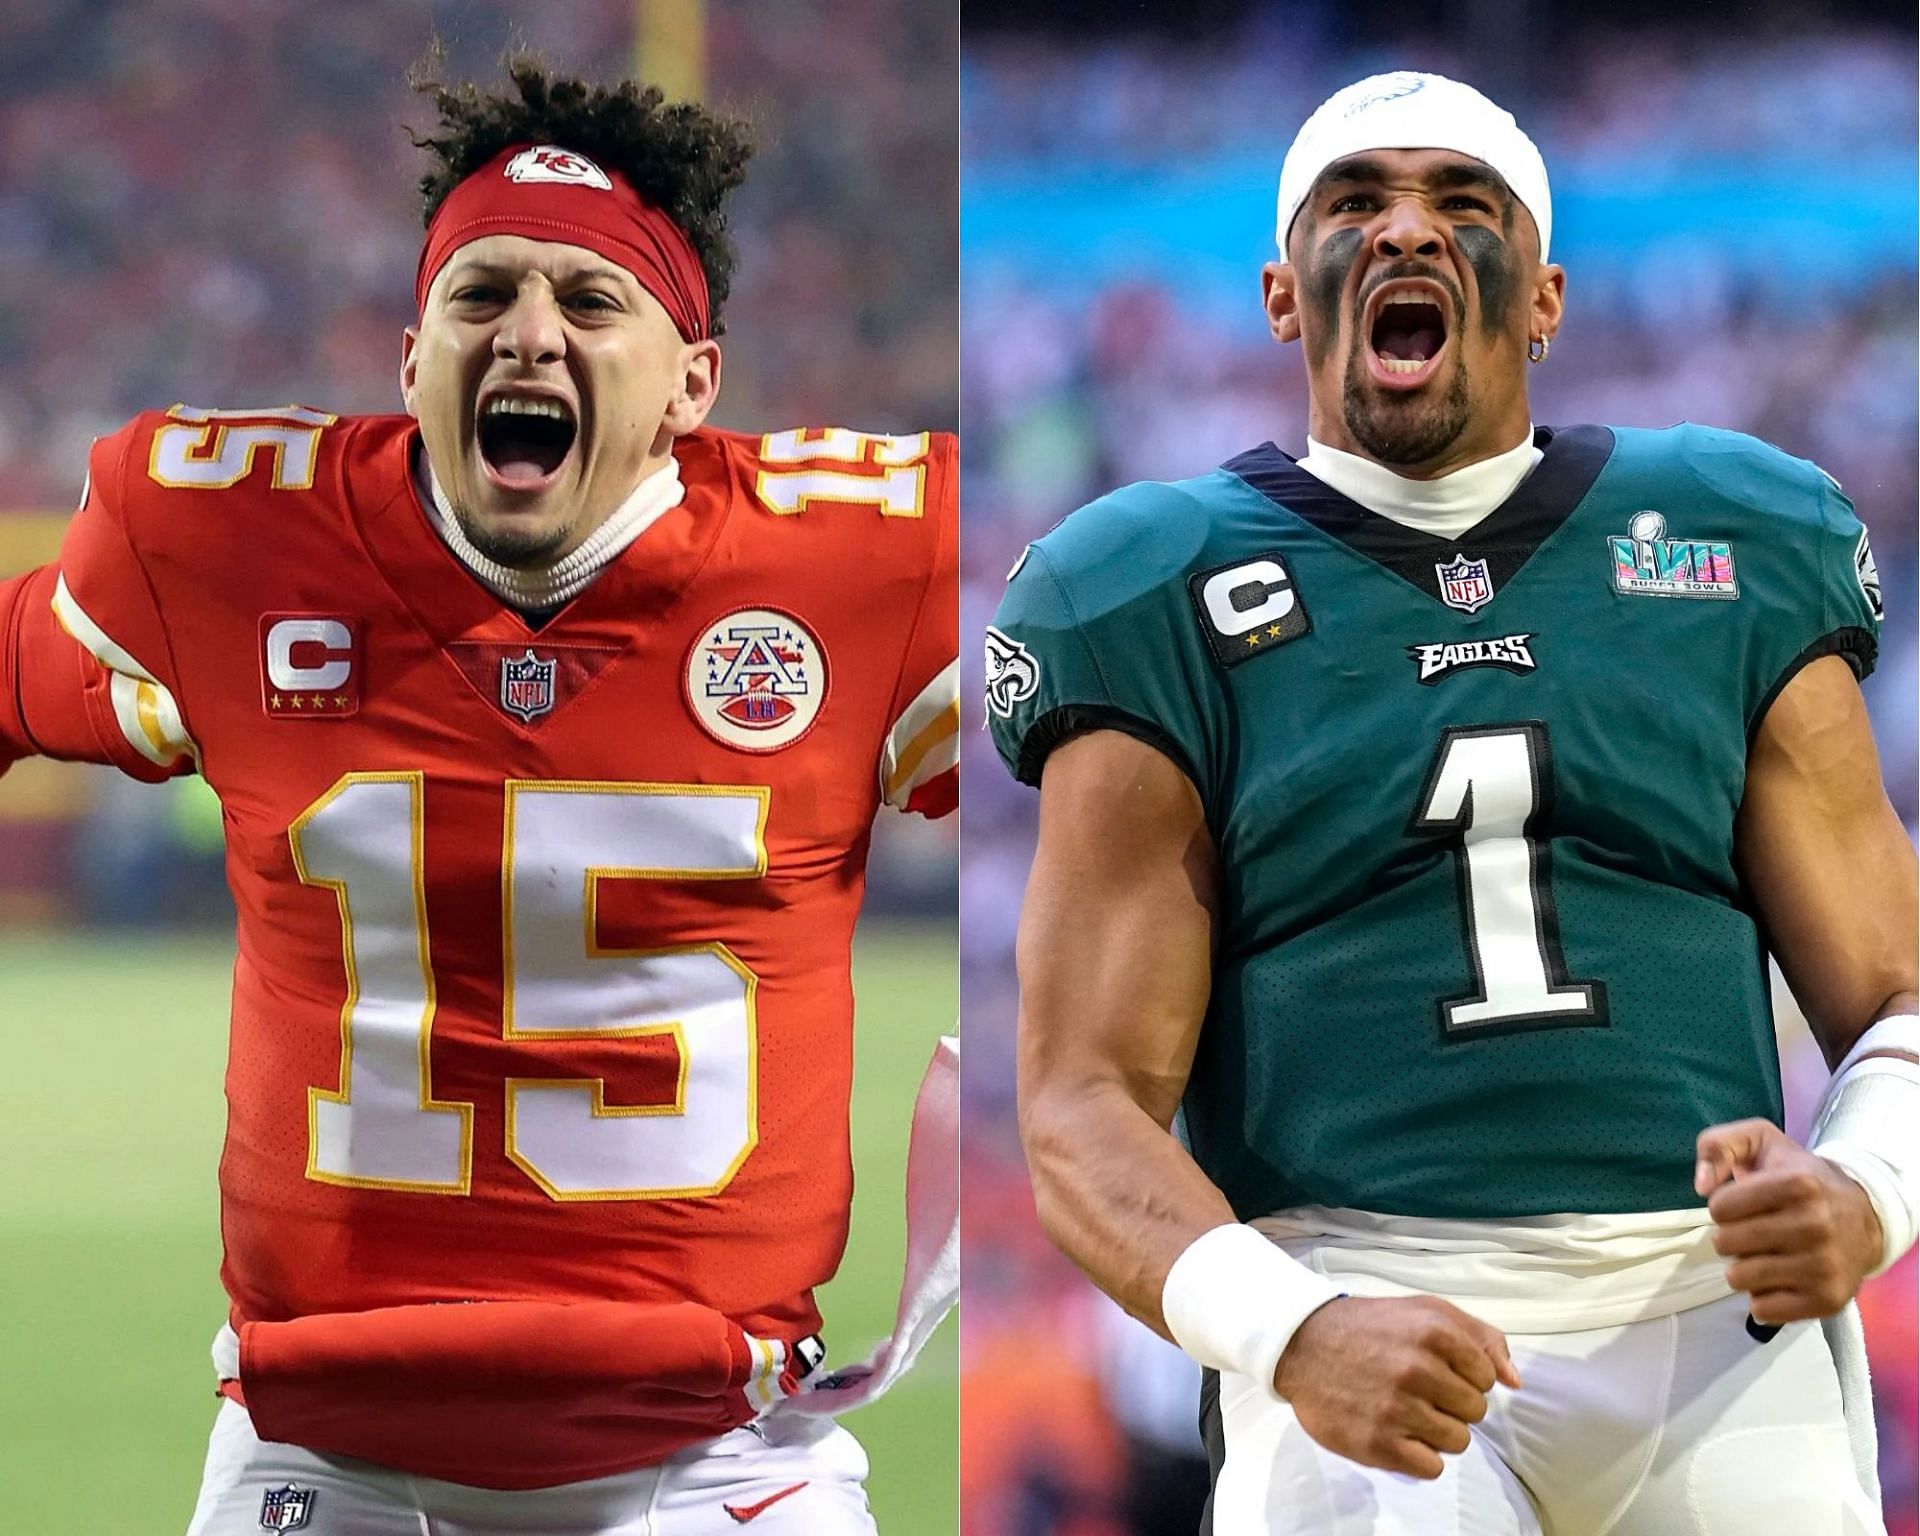 Patrick Mahomes and Jalen Hurts are now the NFL